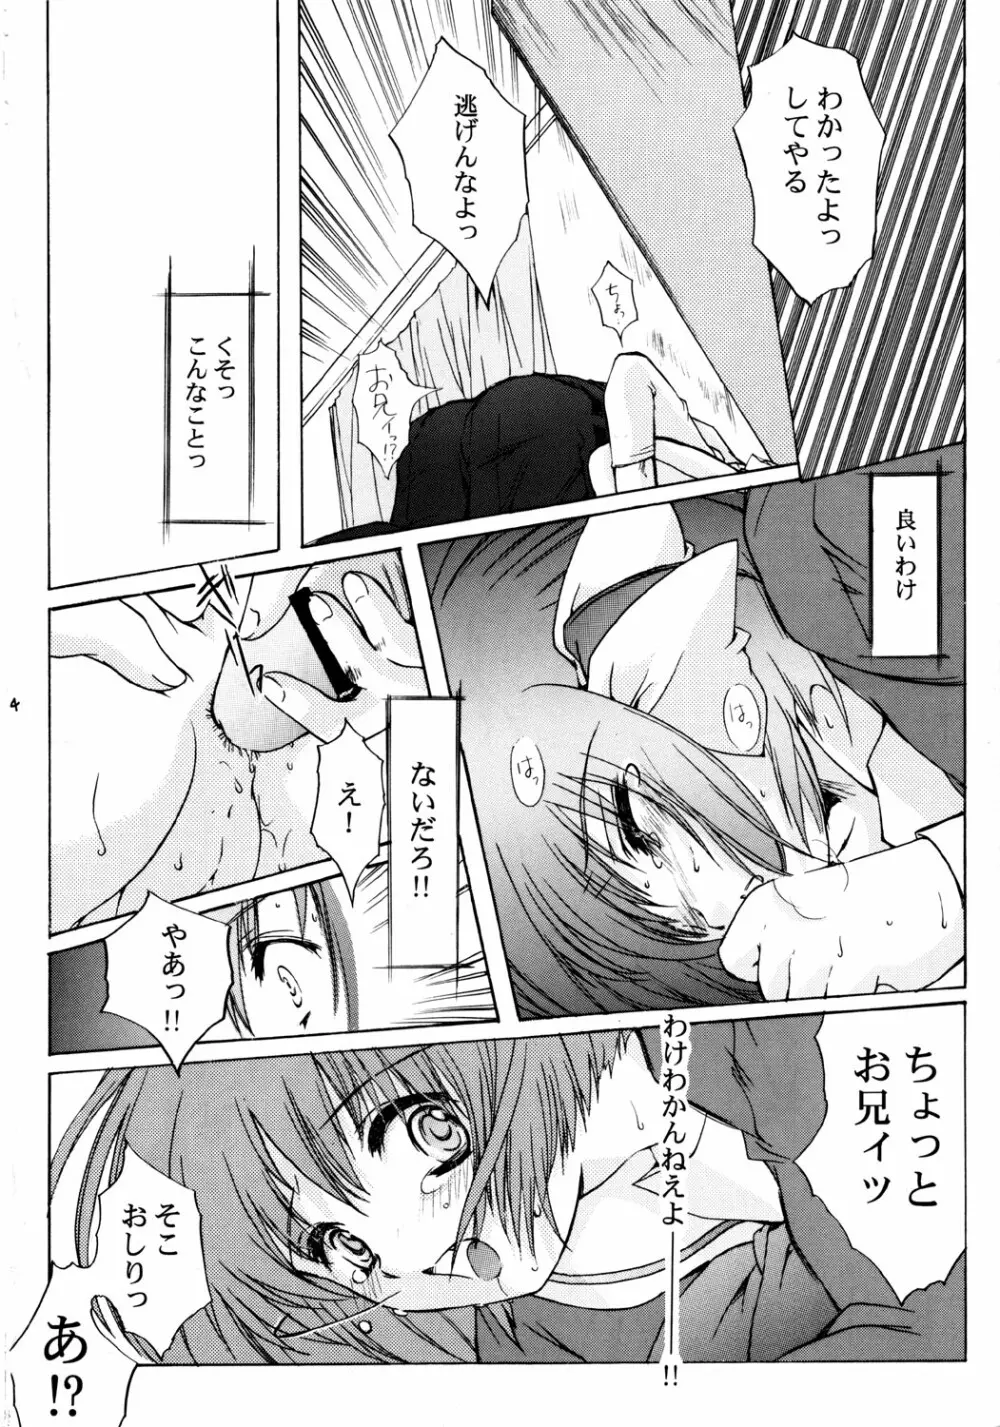 THE REASON Second Volume - page13